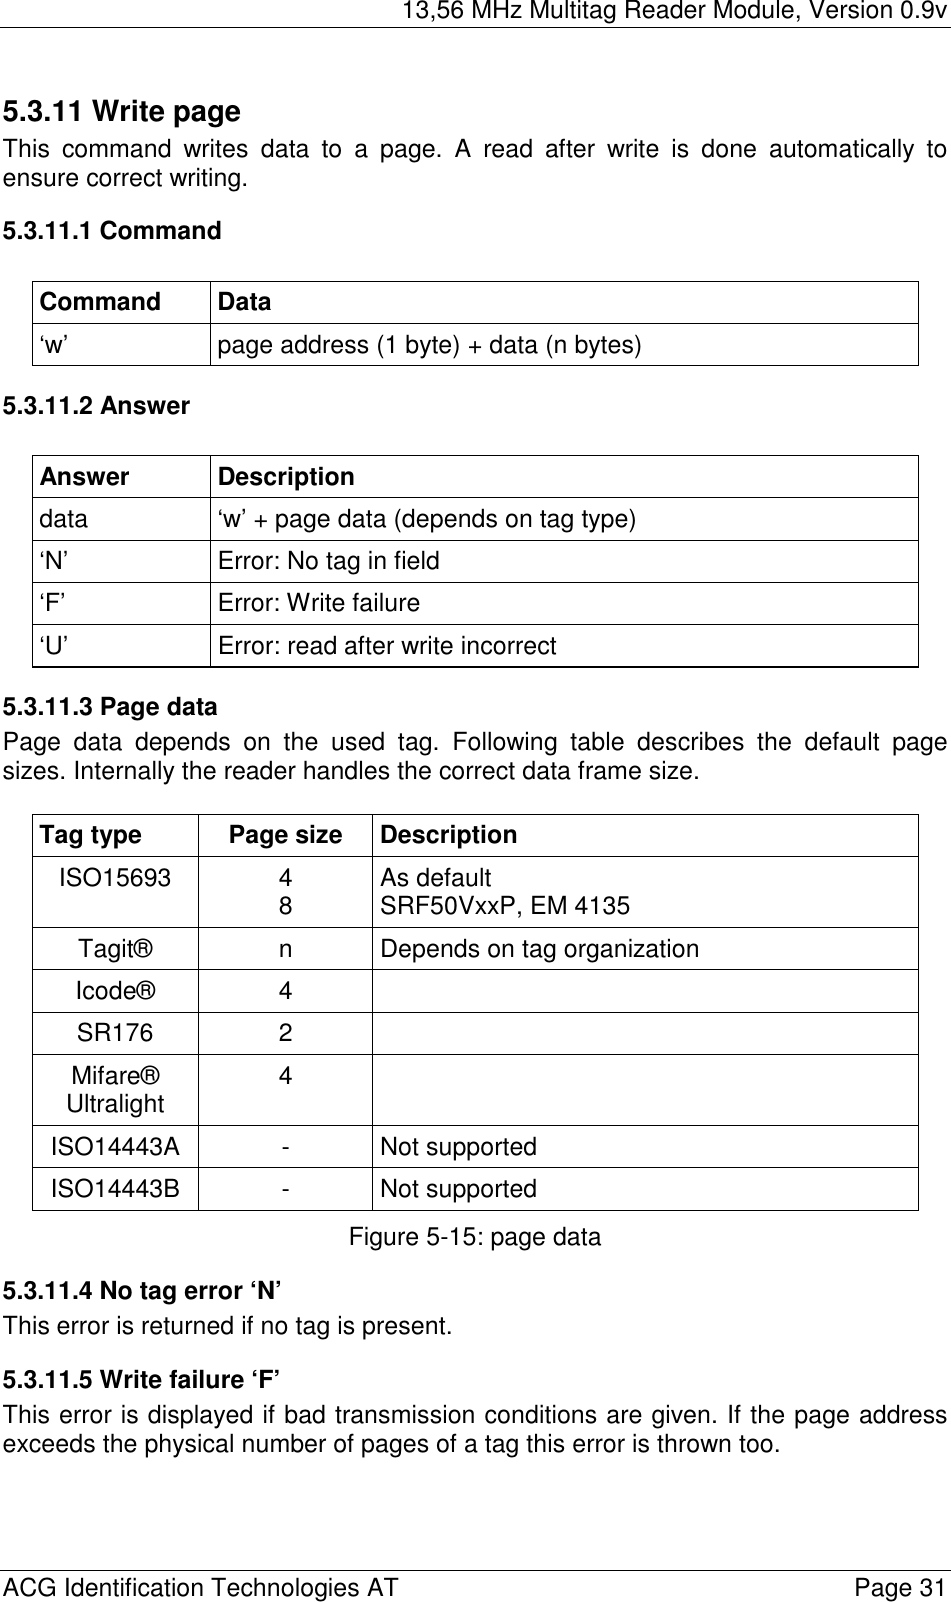 13,56 MHz Multitag Reader Module, Version 0.9v  ACG Identification Technologies AT    Page 31 5.3.11 Write page This command writes data to a page. A read after write is done automatically to ensure correct writing. 5.3.11.1 Command  Command Data ‘w’  page address (1 byte) + data (n bytes) 5.3.11.2 Answer  Answer Description data  ‘w’ + page data (depends on tag type) ‘N’  Error: No tag in field ‘F’ Error: Write failure ‘U’  Error: read after write incorrect 5.3.11.3 Page data Page data depends on the used tag. Following table describes the default page sizes. Internally the reader handles the correct data frame size.  Tag type  Page size  Description ISO15693 4 8  As default SRF50VxxP, EM 4135 Tagit®  n  Depends on tag organization Icode® 4  SR176 2  Mifare® Ultralight  4  ISO14443A - Not supported ISO14443B - Not supported Figure 5-15: page data 5.3.11.4 No tag error ‘N’ This error is returned if no tag is present. 5.3.11.5 Write failure ‘F’ This error is displayed if bad transmission conditions are given. If the page address exceeds the physical number of pages of a tag this error is thrown too. 